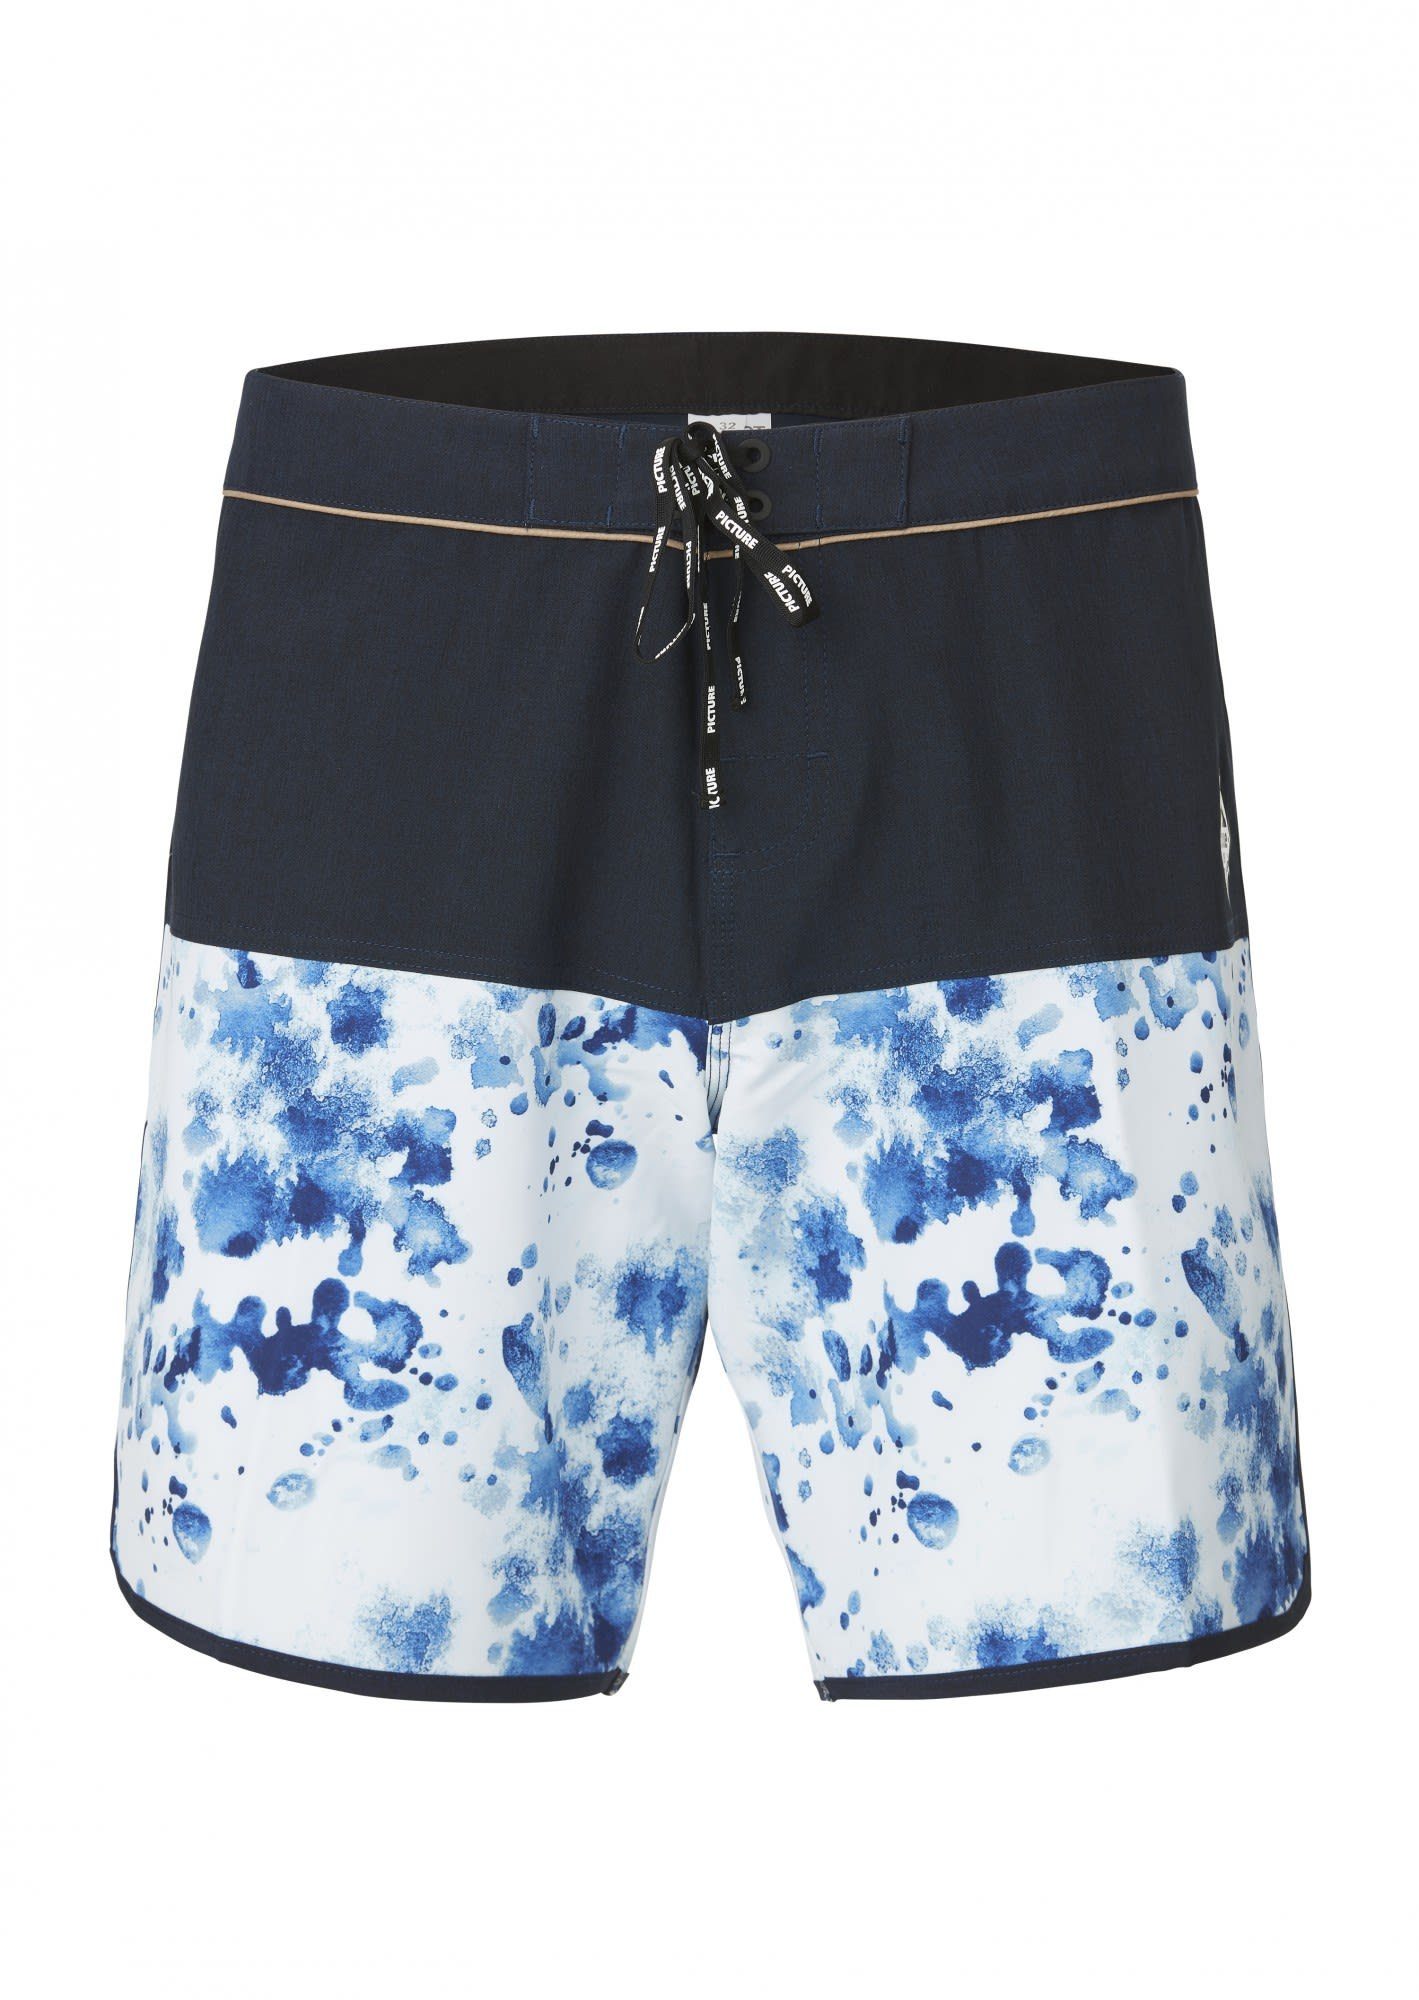 Picture Strandshorts Picture M Andy 17 Boardshorts Herren Shorts Ocean